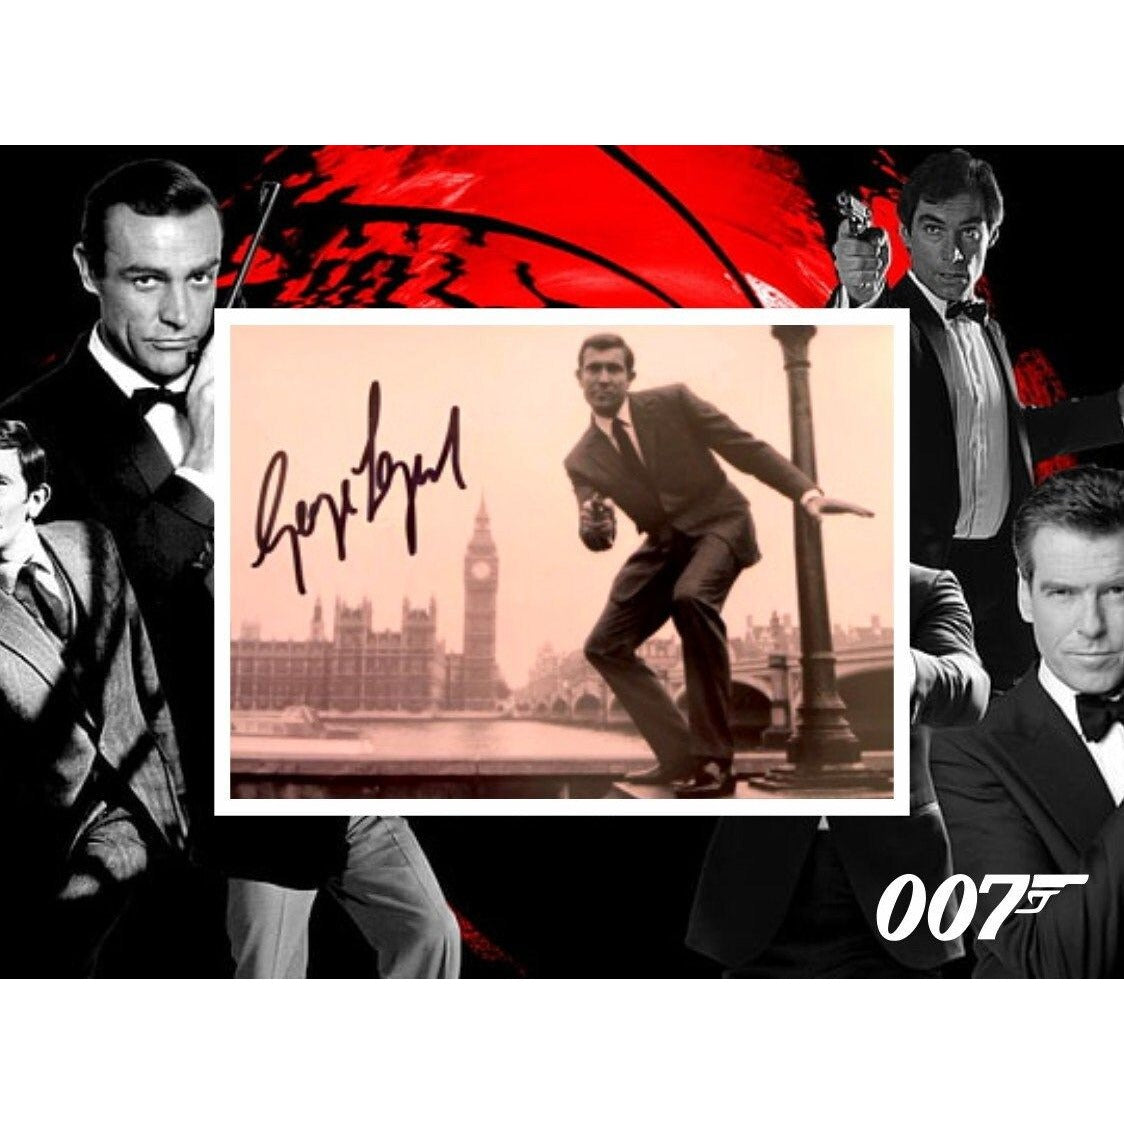 George Lazenby James Bond double O7 5 x 7 photo signed with proof